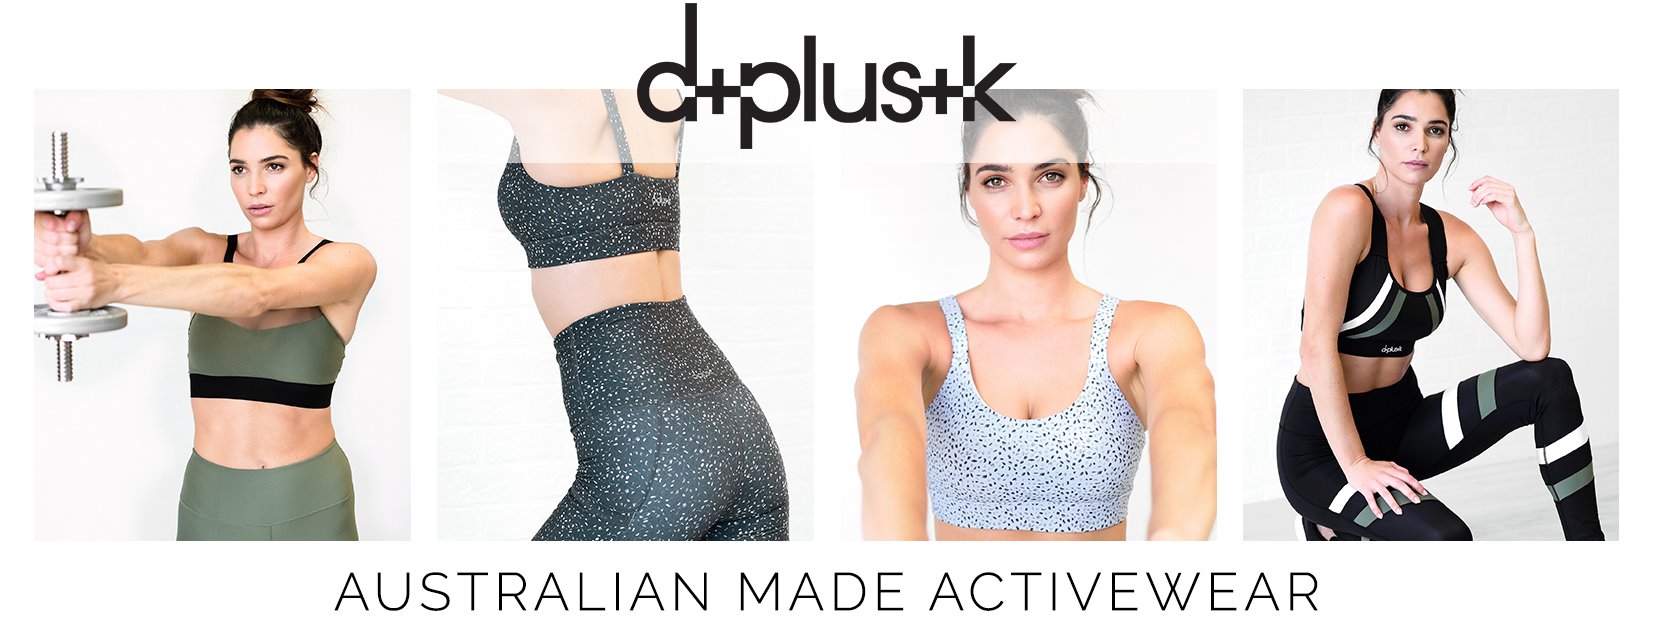 D+K Active - Shh, extra $20 OFF with discount code, Free shipping $100+